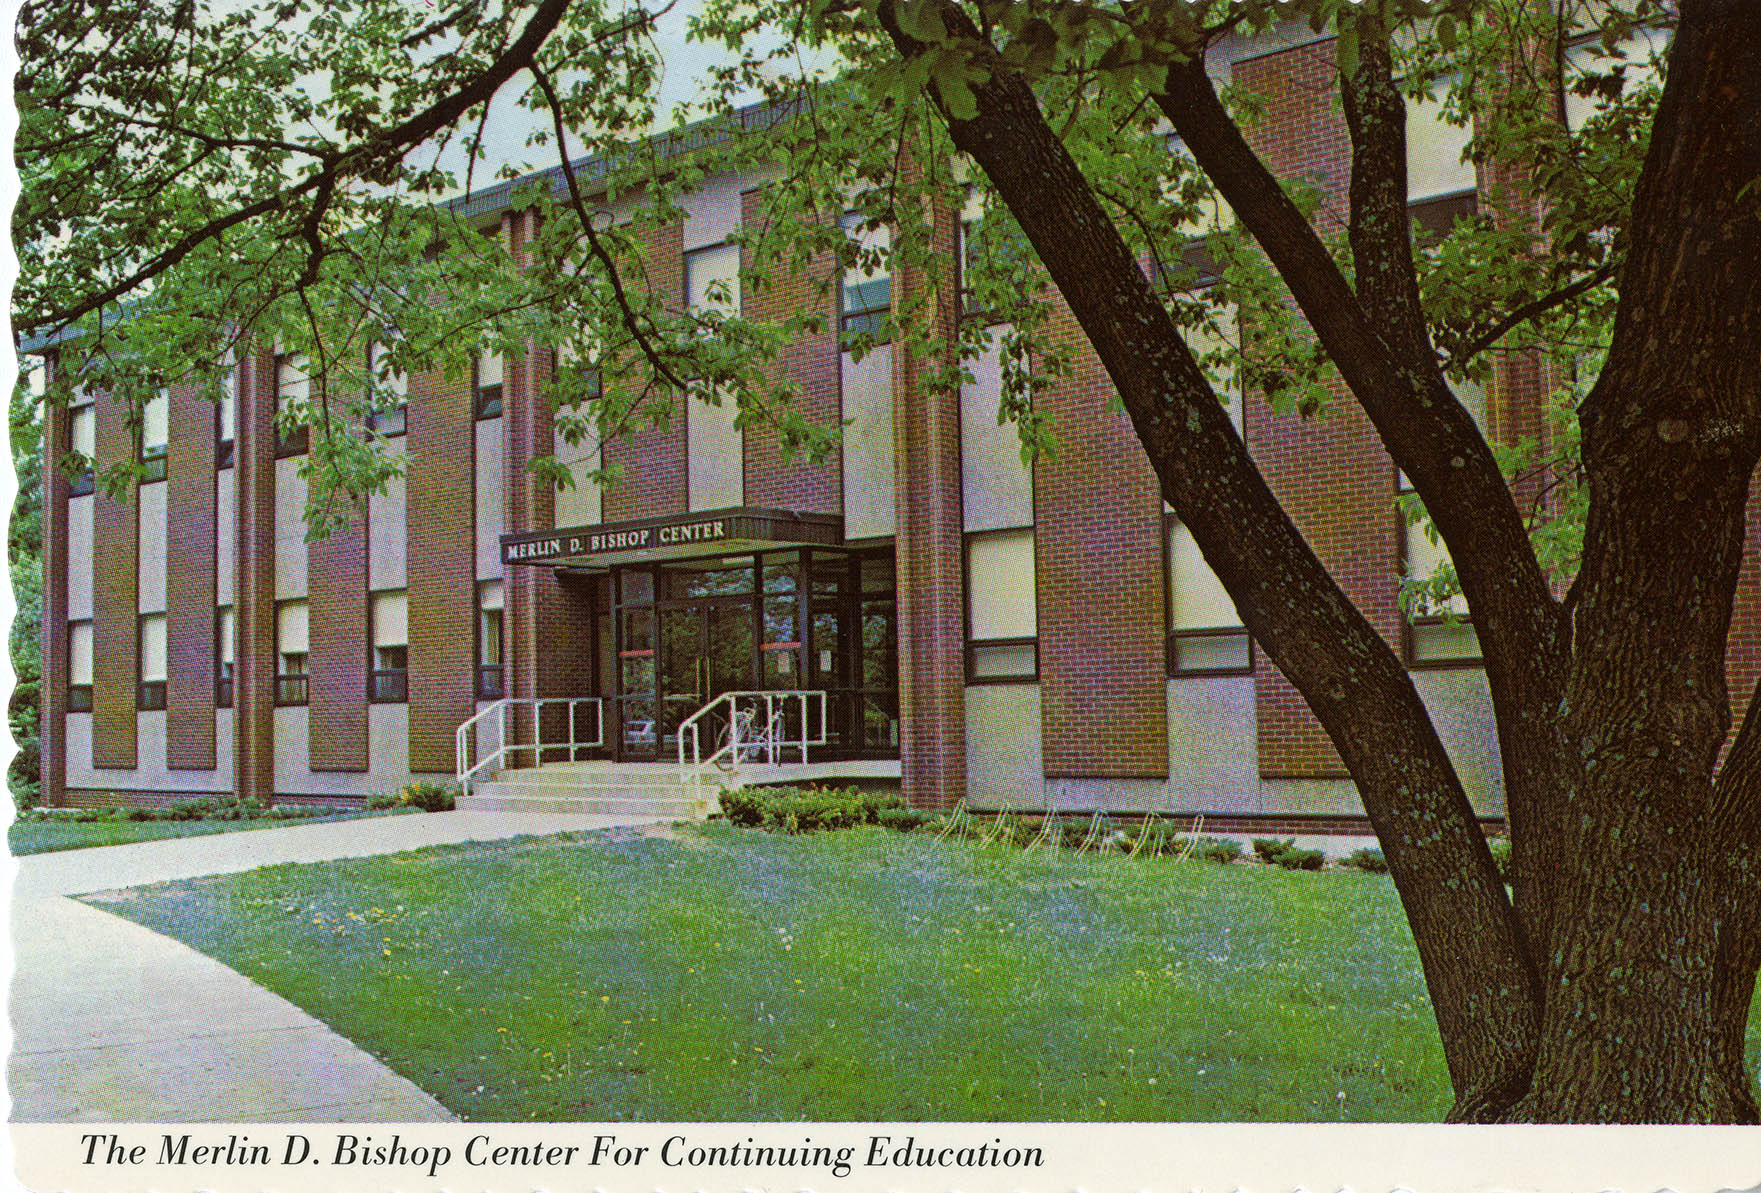 Postcard of the Merlin D. Bishop Center, University of Connecticut